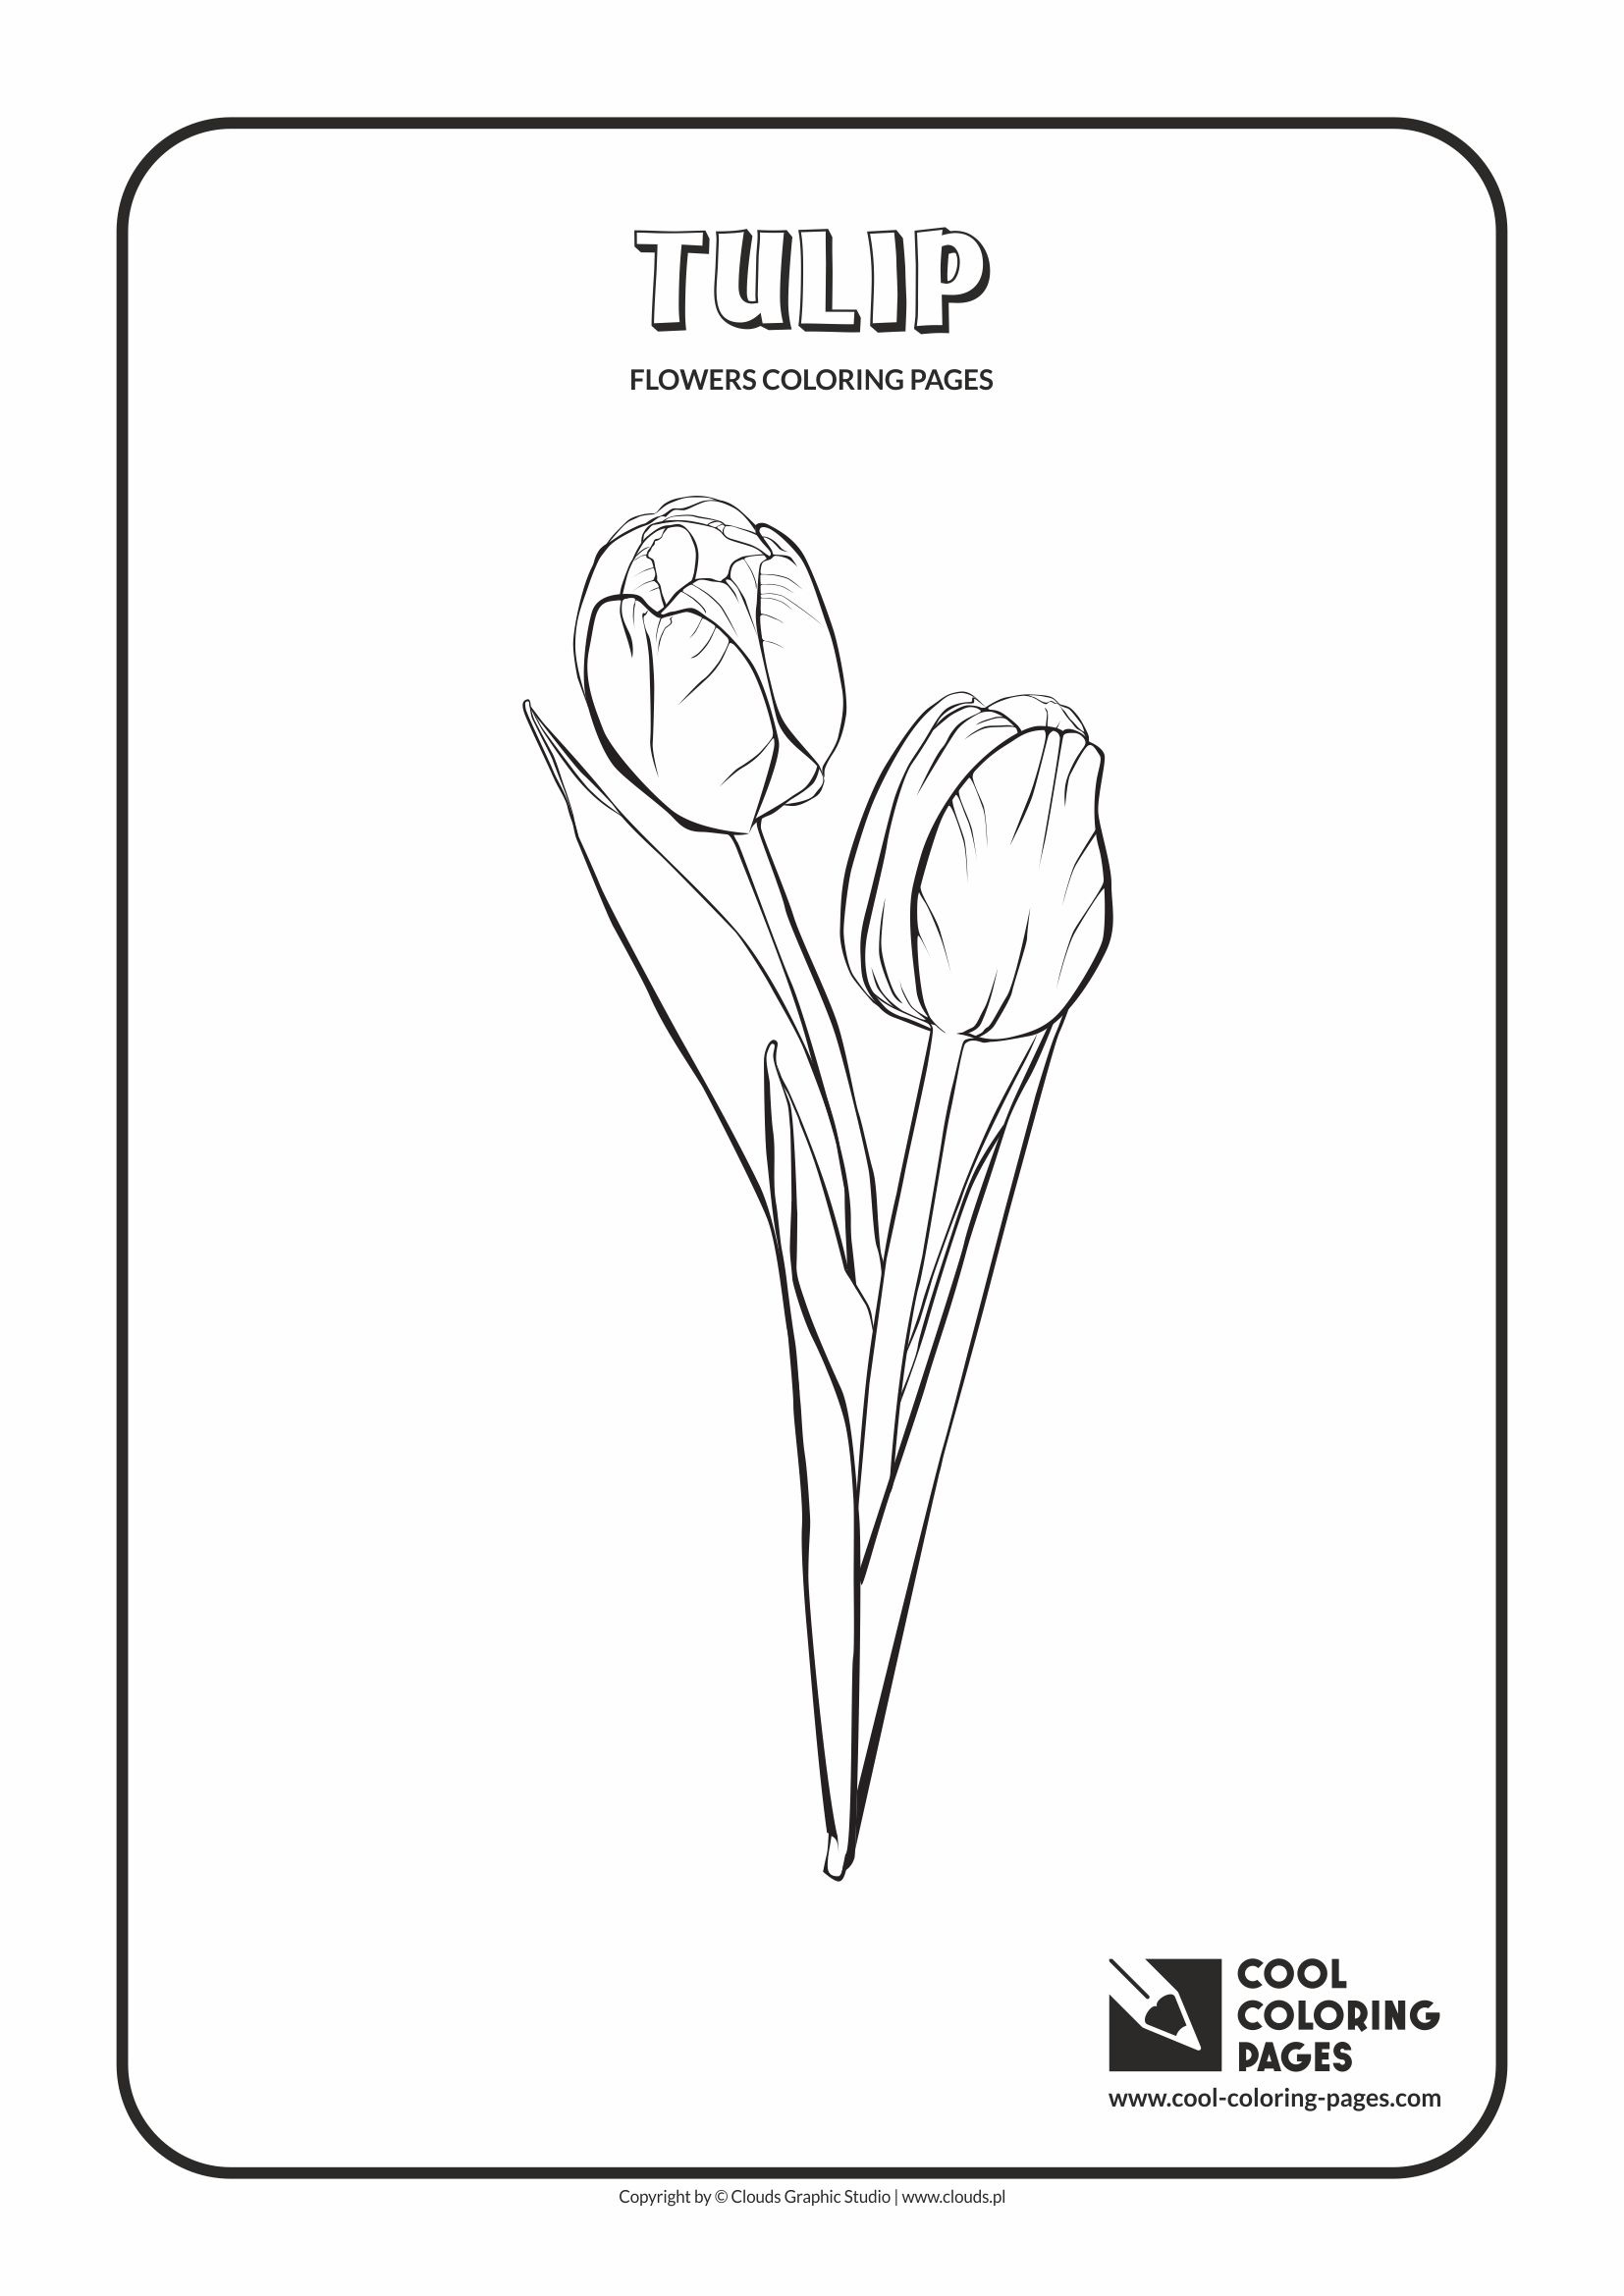 Cool Coloring Pages Tulip coloring page - Cool Coloring ...